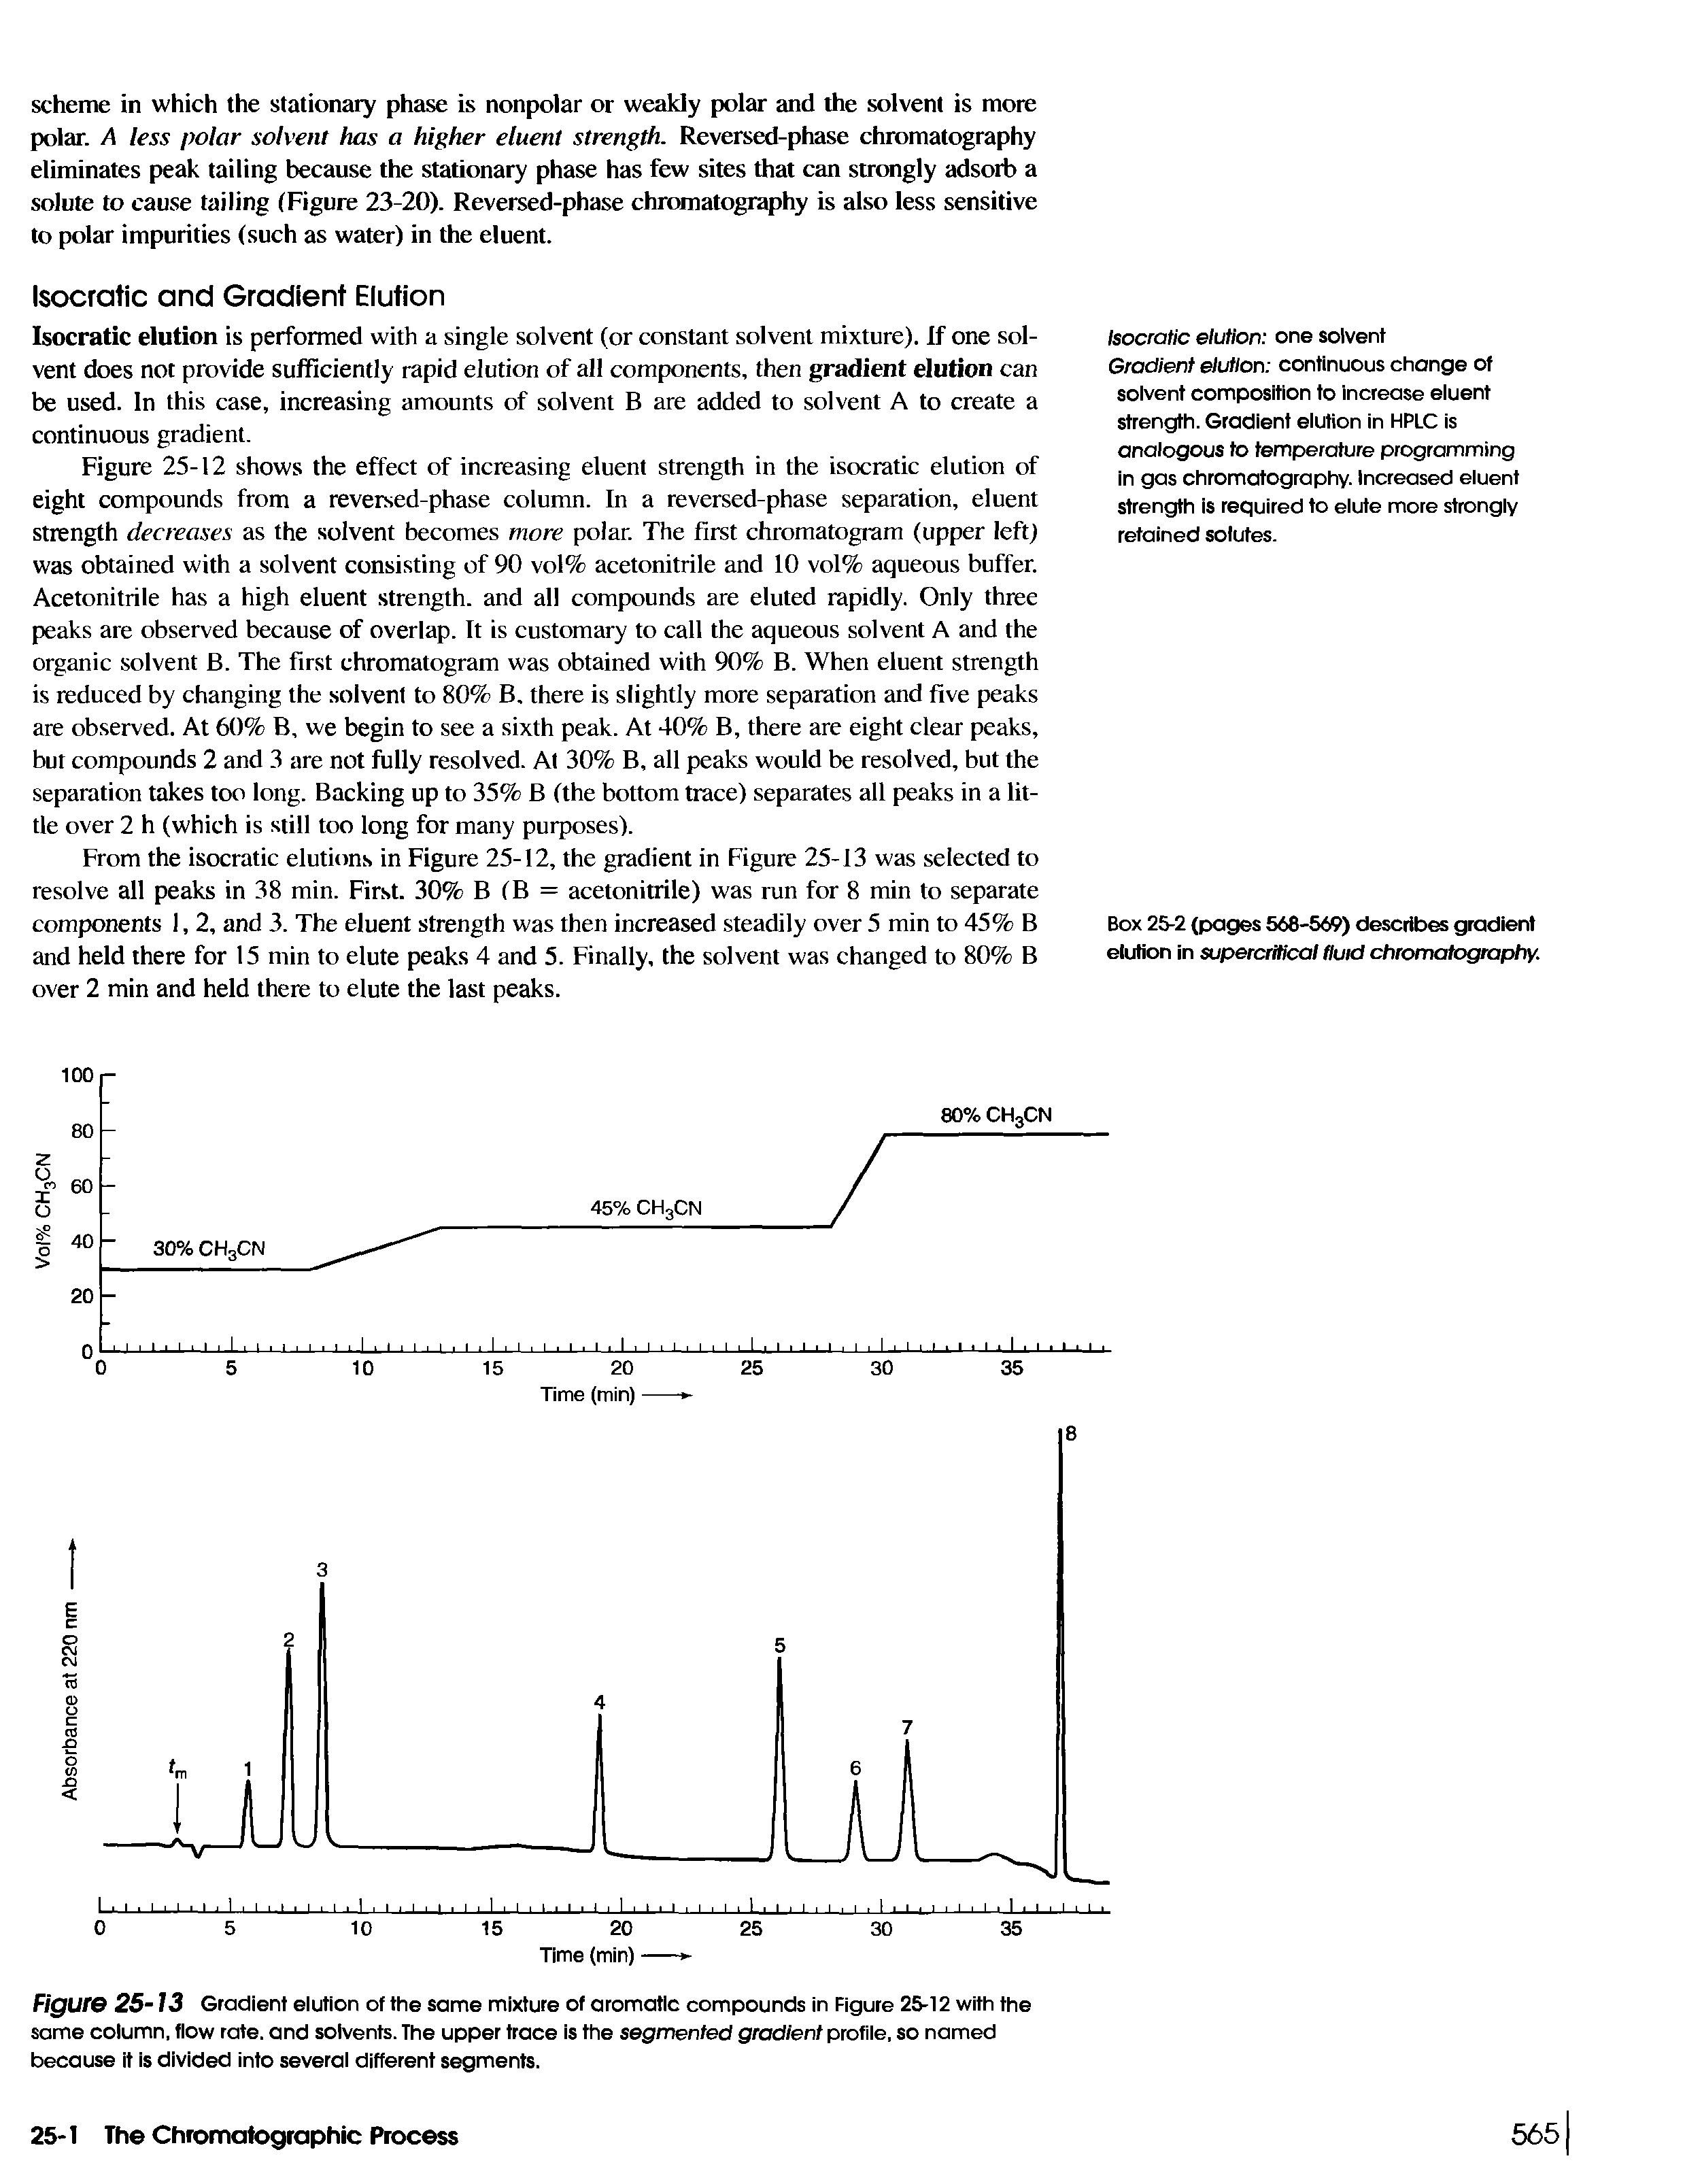 Figure 25-13 Gradient elution of the same mixture of aromatic compounds in Figure 25-12 with the same column, flow rate, and solvents. The upper trace is the segmented gradient profile, so named because it is divided into several different segments.